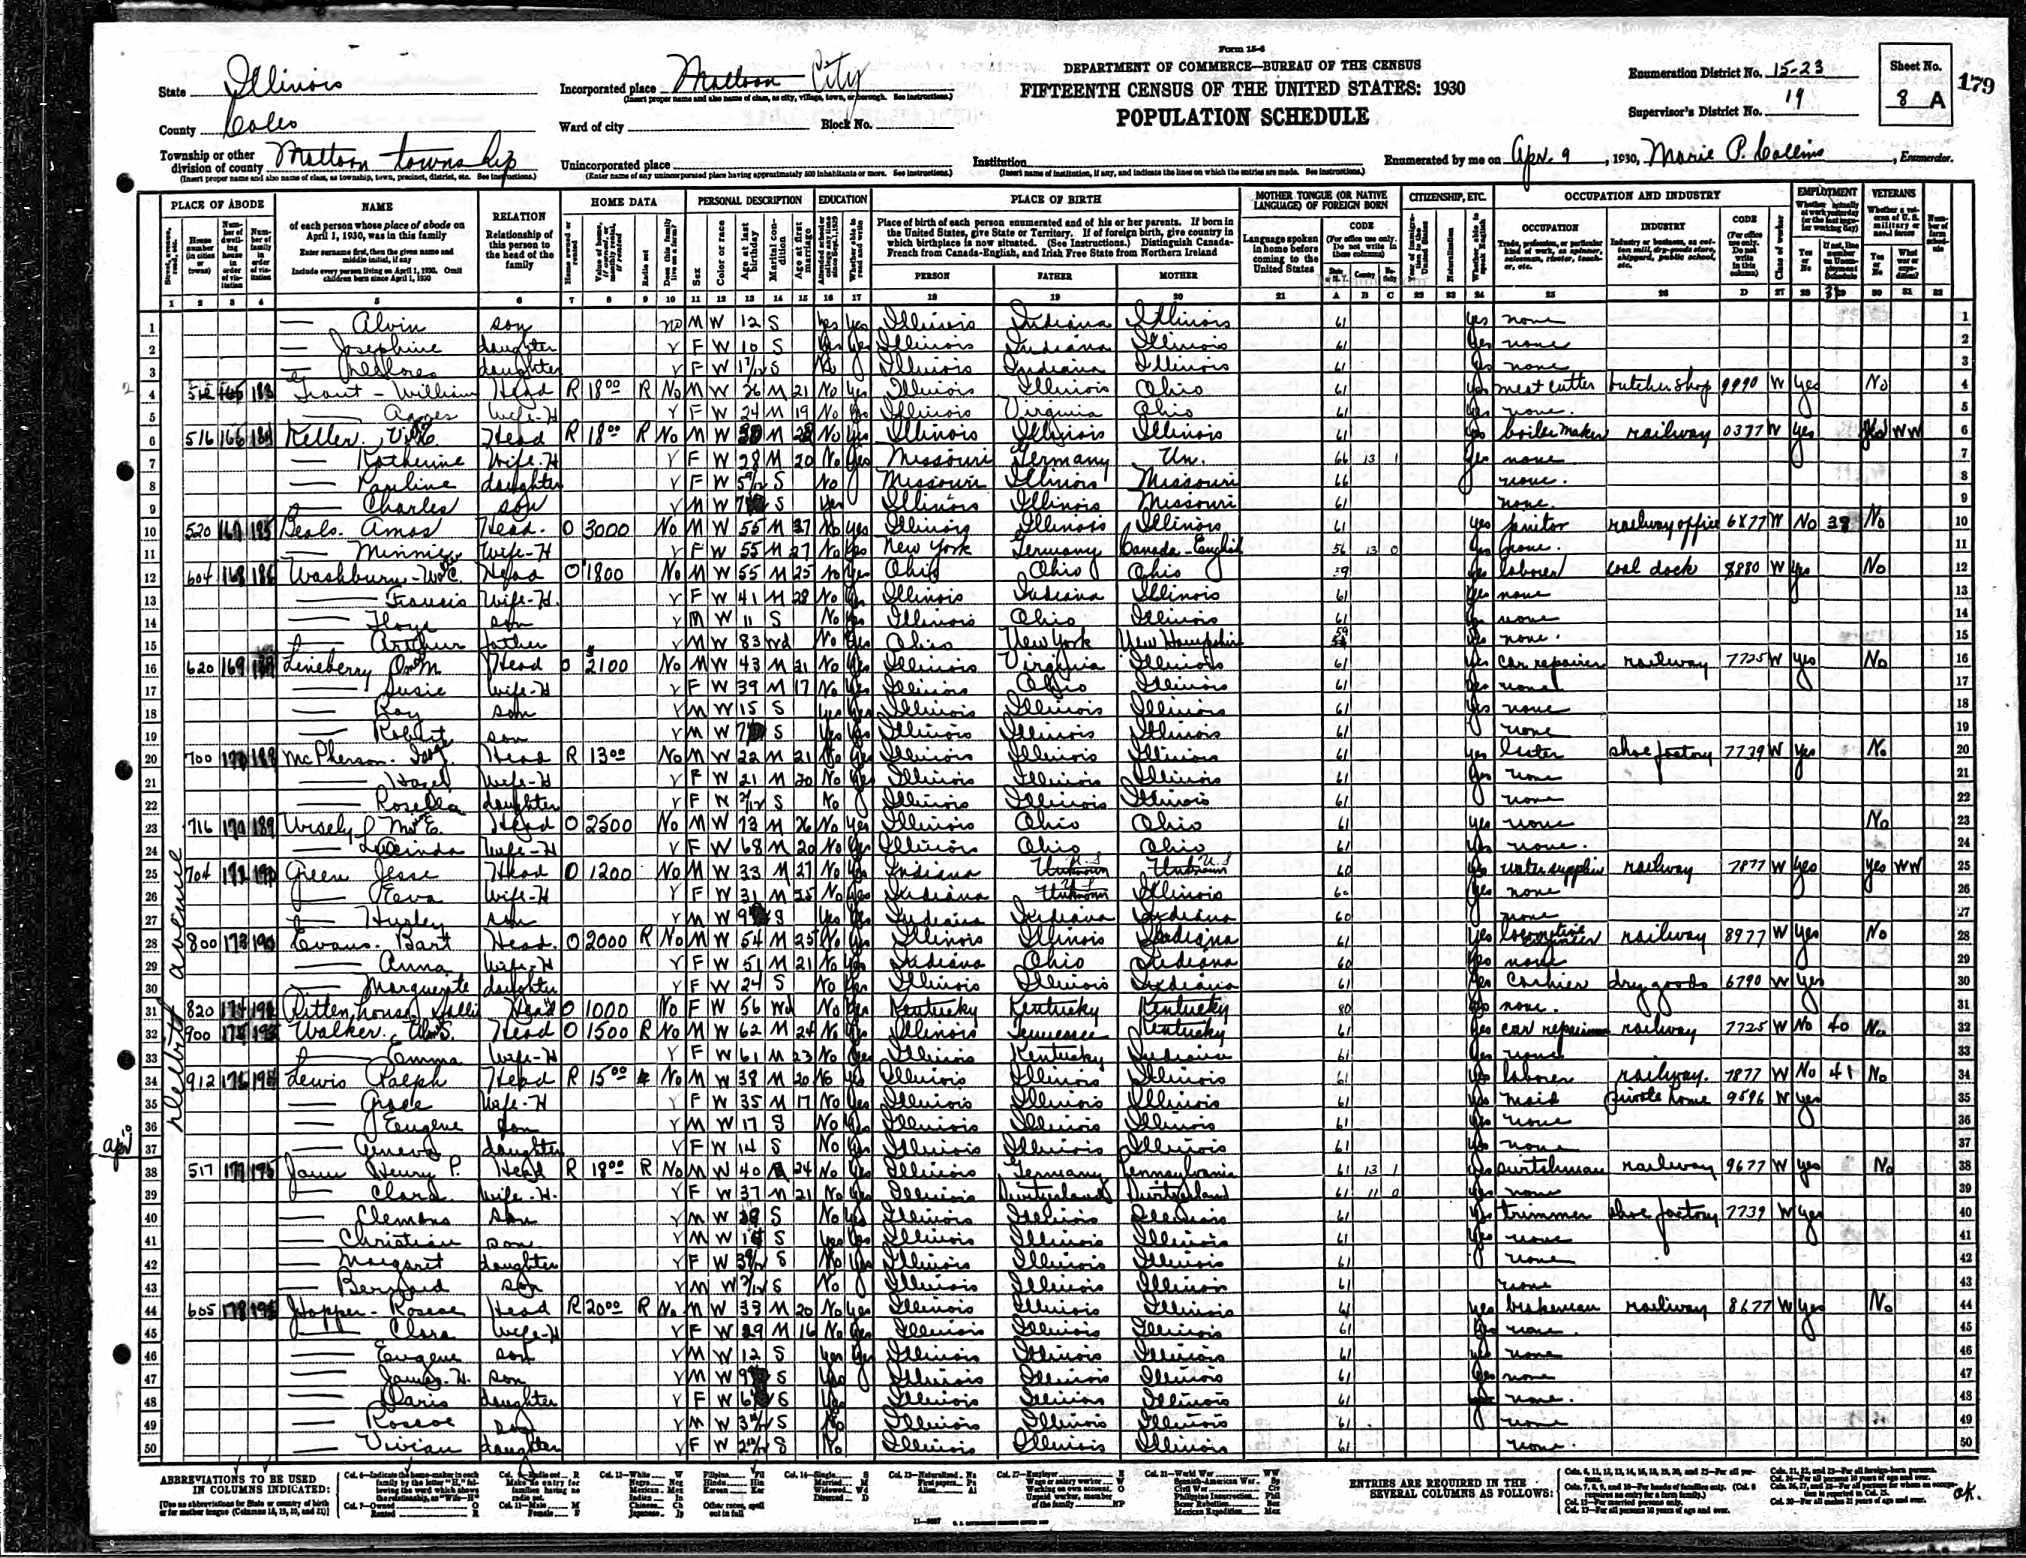 Ulysses S. and Emma (Senteney) Walker, 1930 Coles County, Illinois, census